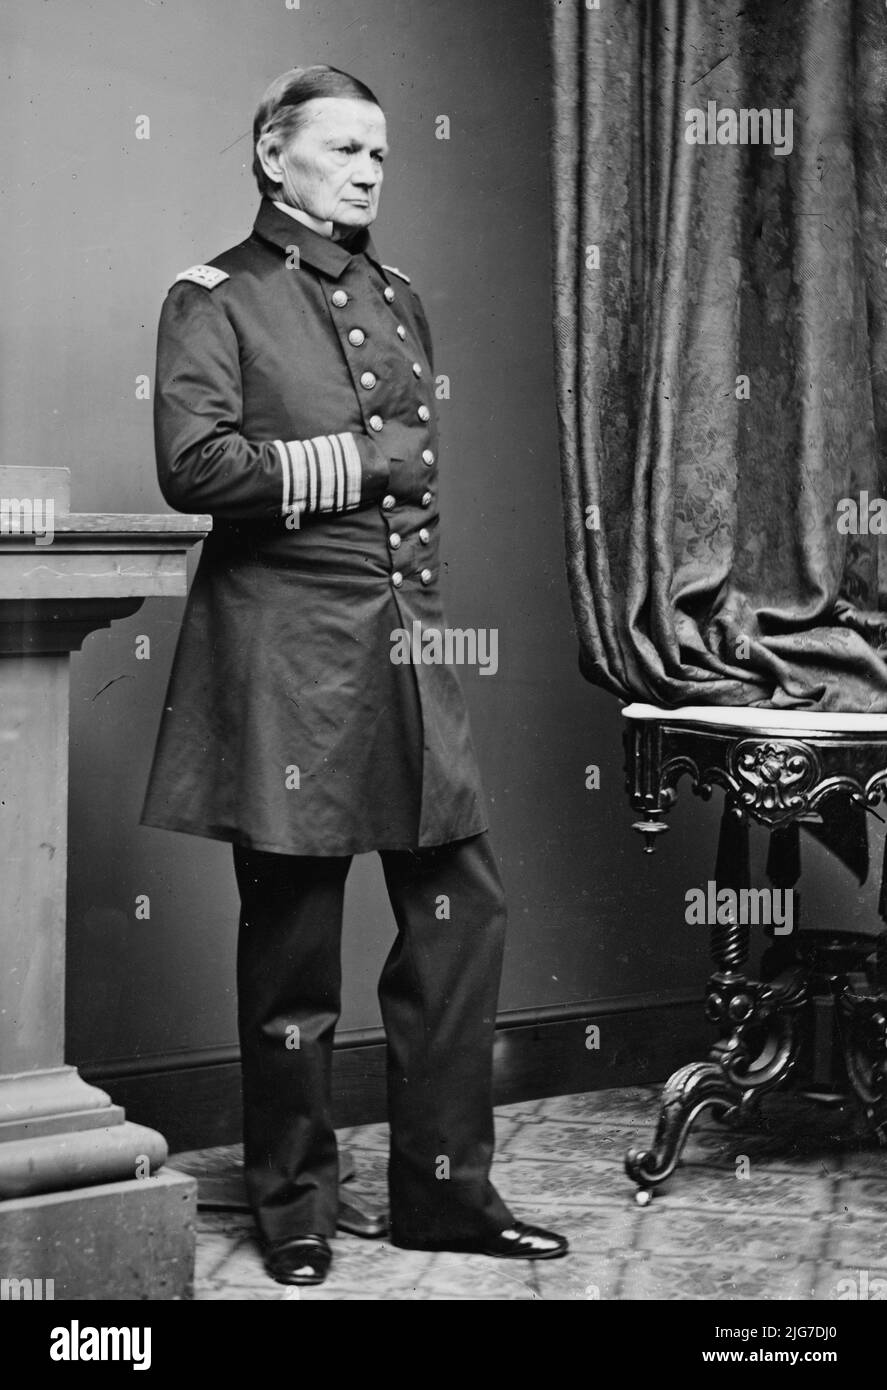 Adm. Smith, U.S.N., between 1855 and 1865. [Sailor, naval officer, rear admiral]. Stock Photo